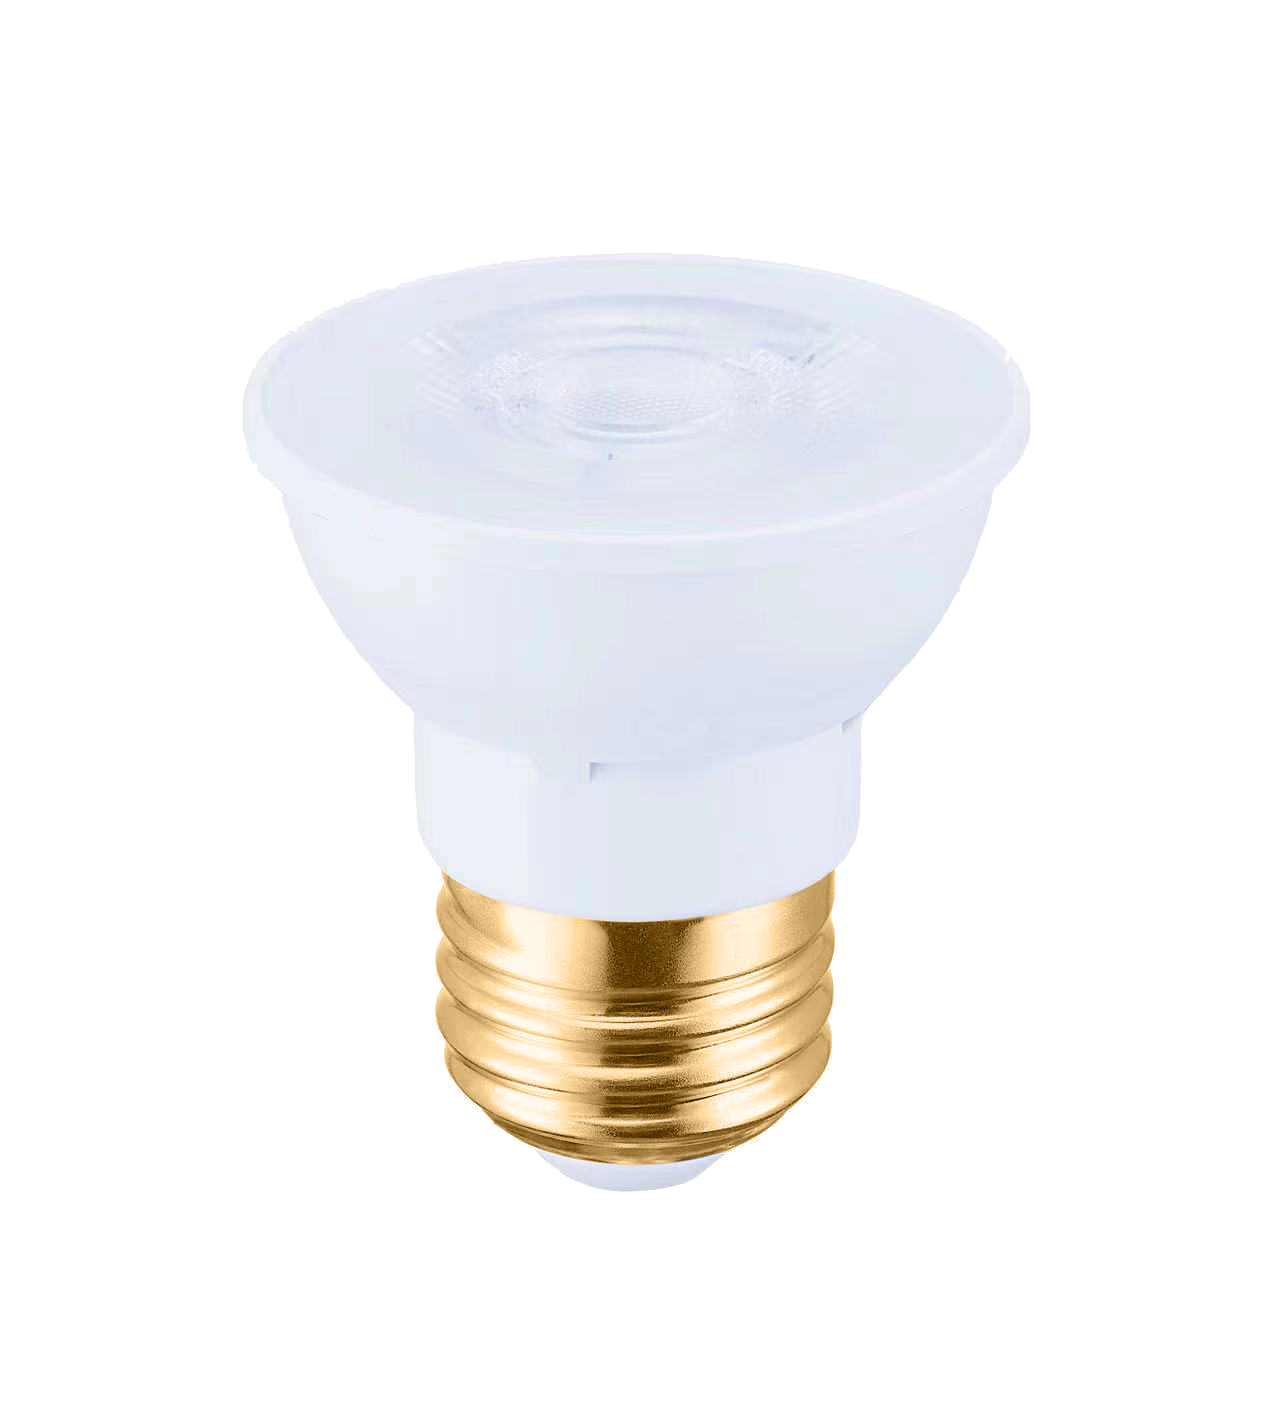 PAR16 LED light bulbs with a clean white 5000K spectrum and can last for 25,000 hours and is dimmable.